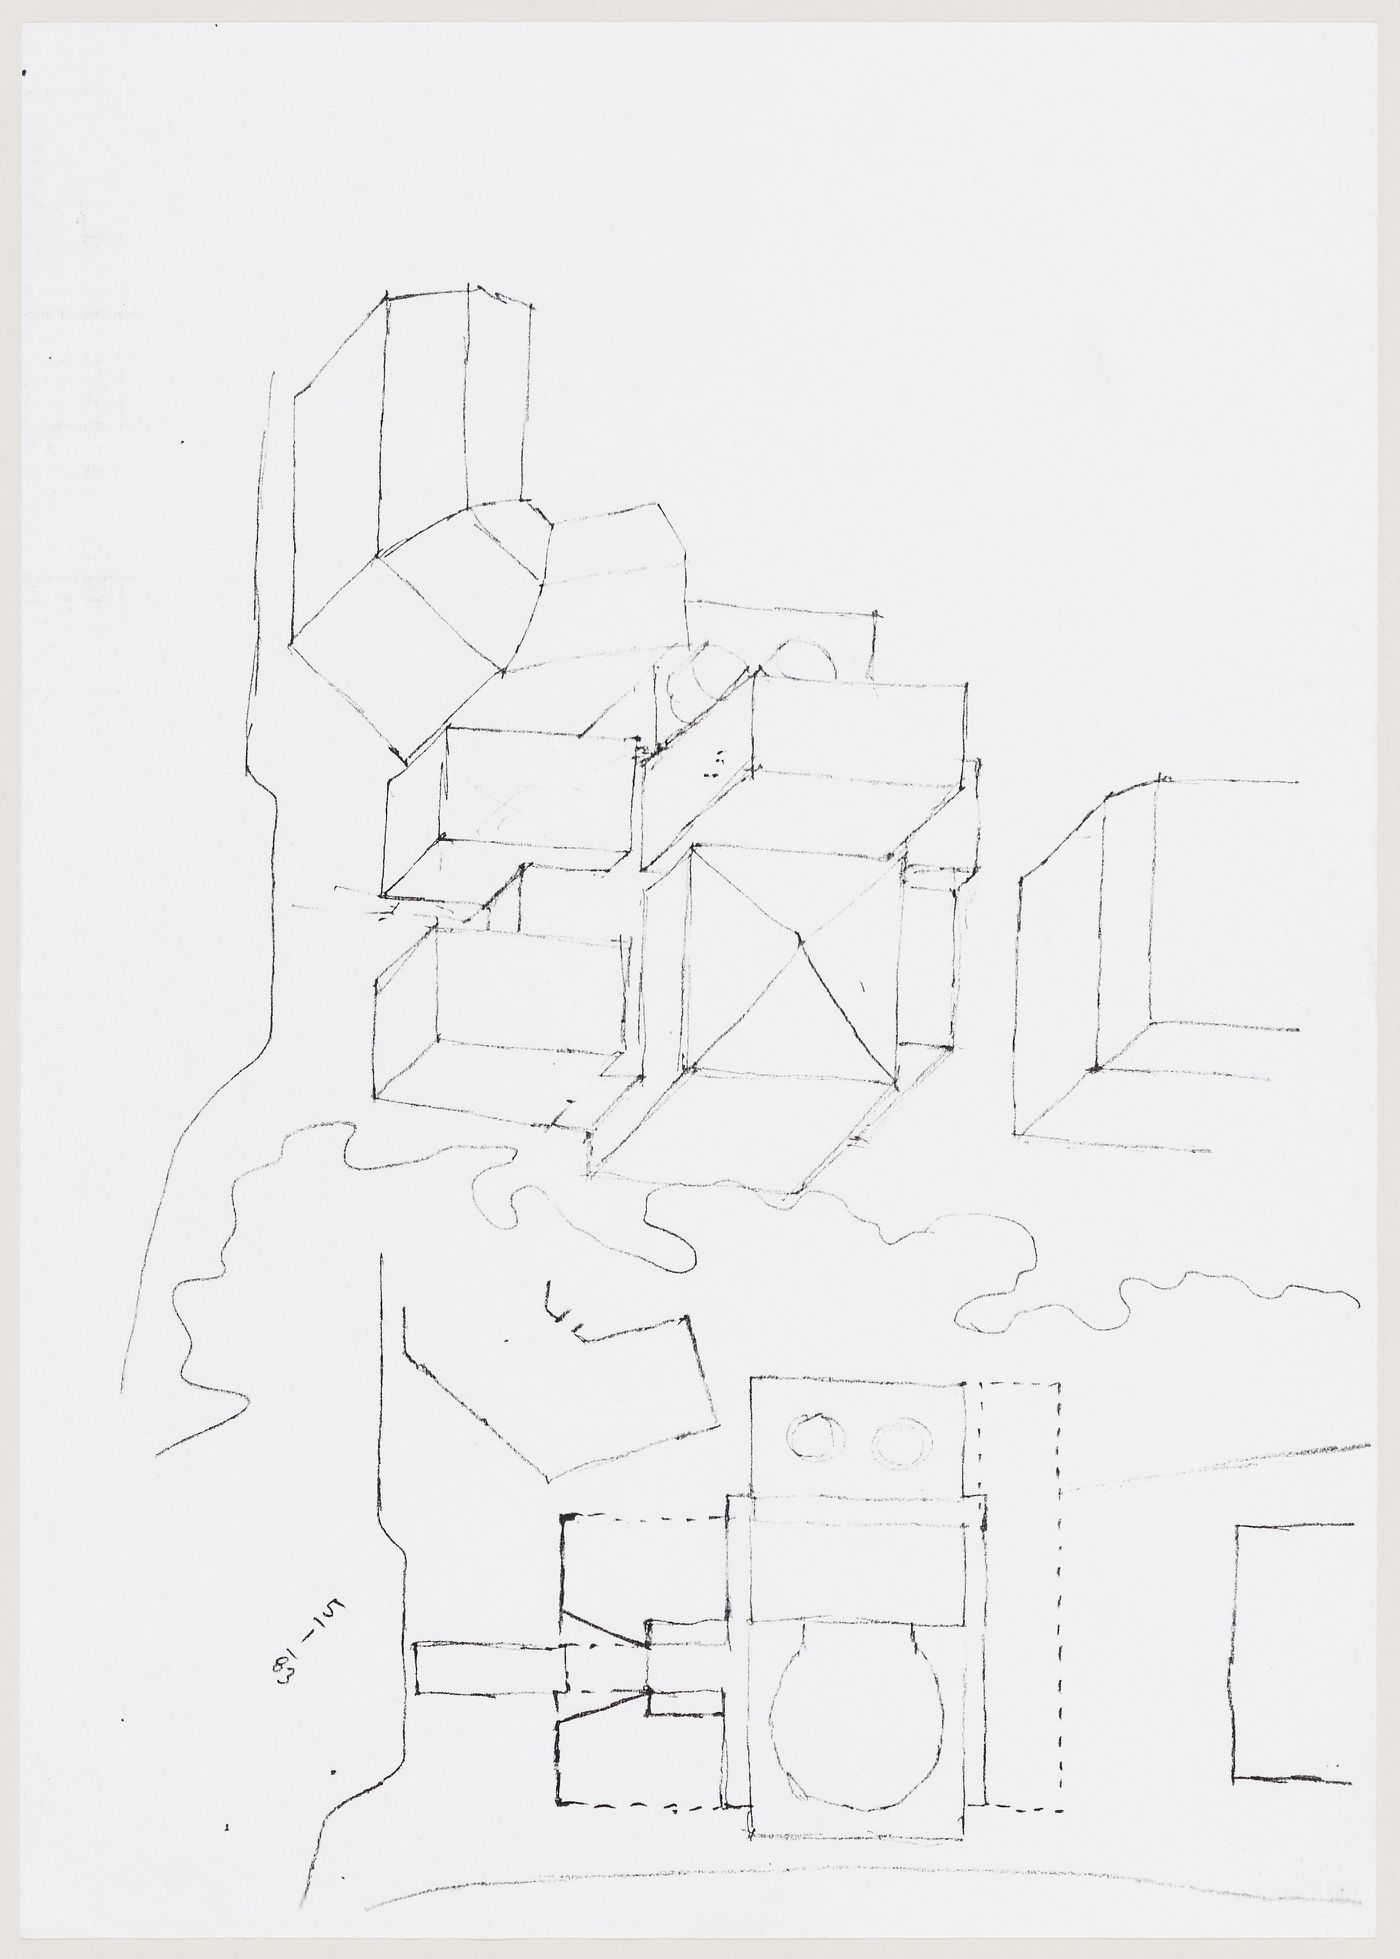 Center for Theatre Arts, Cornell University, Ithaca, New York: sketch axonometric and plan